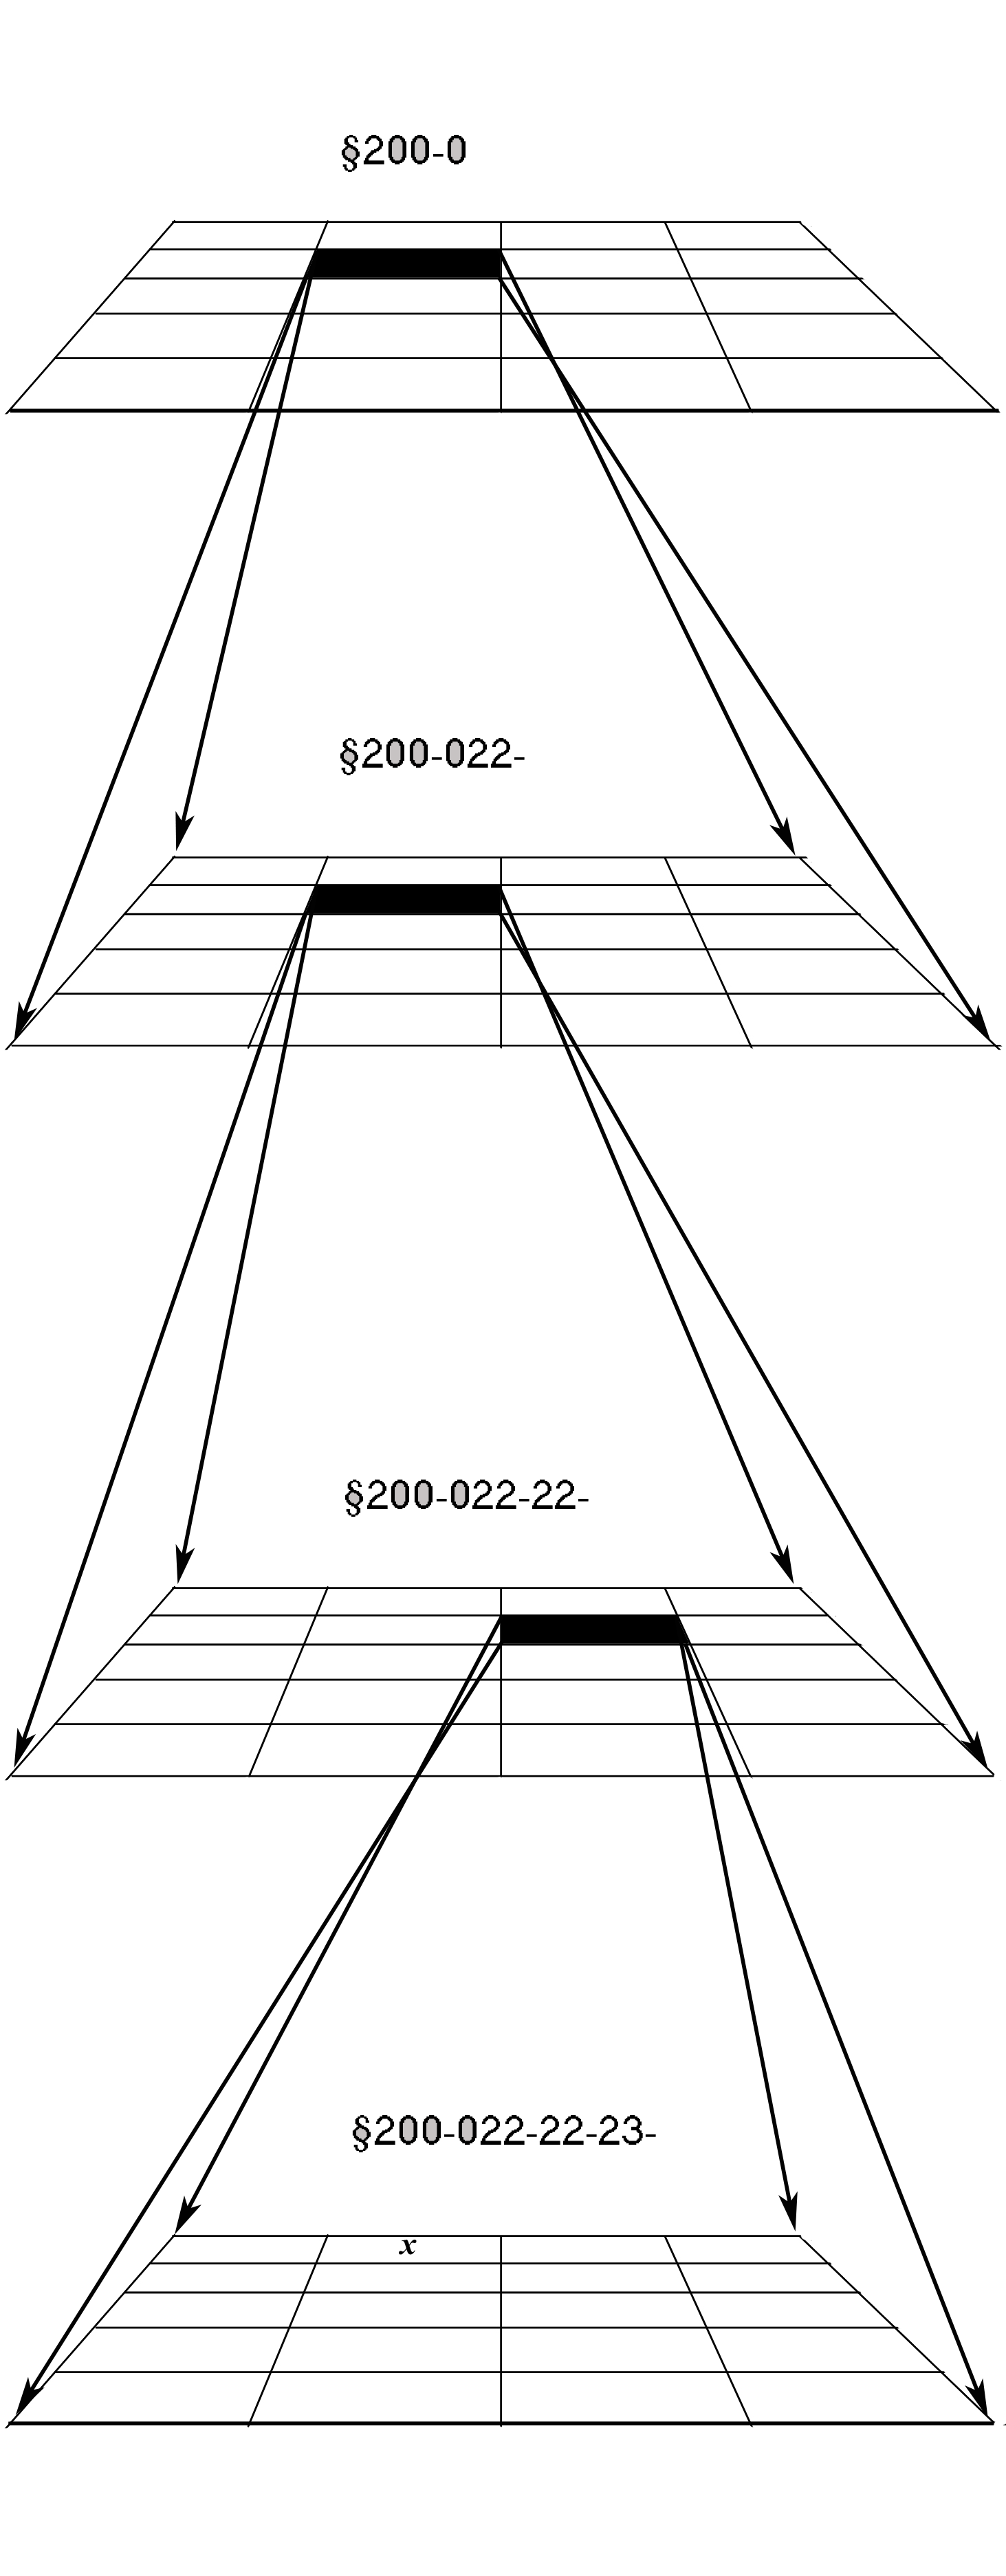 Image: Projection of Matrices 